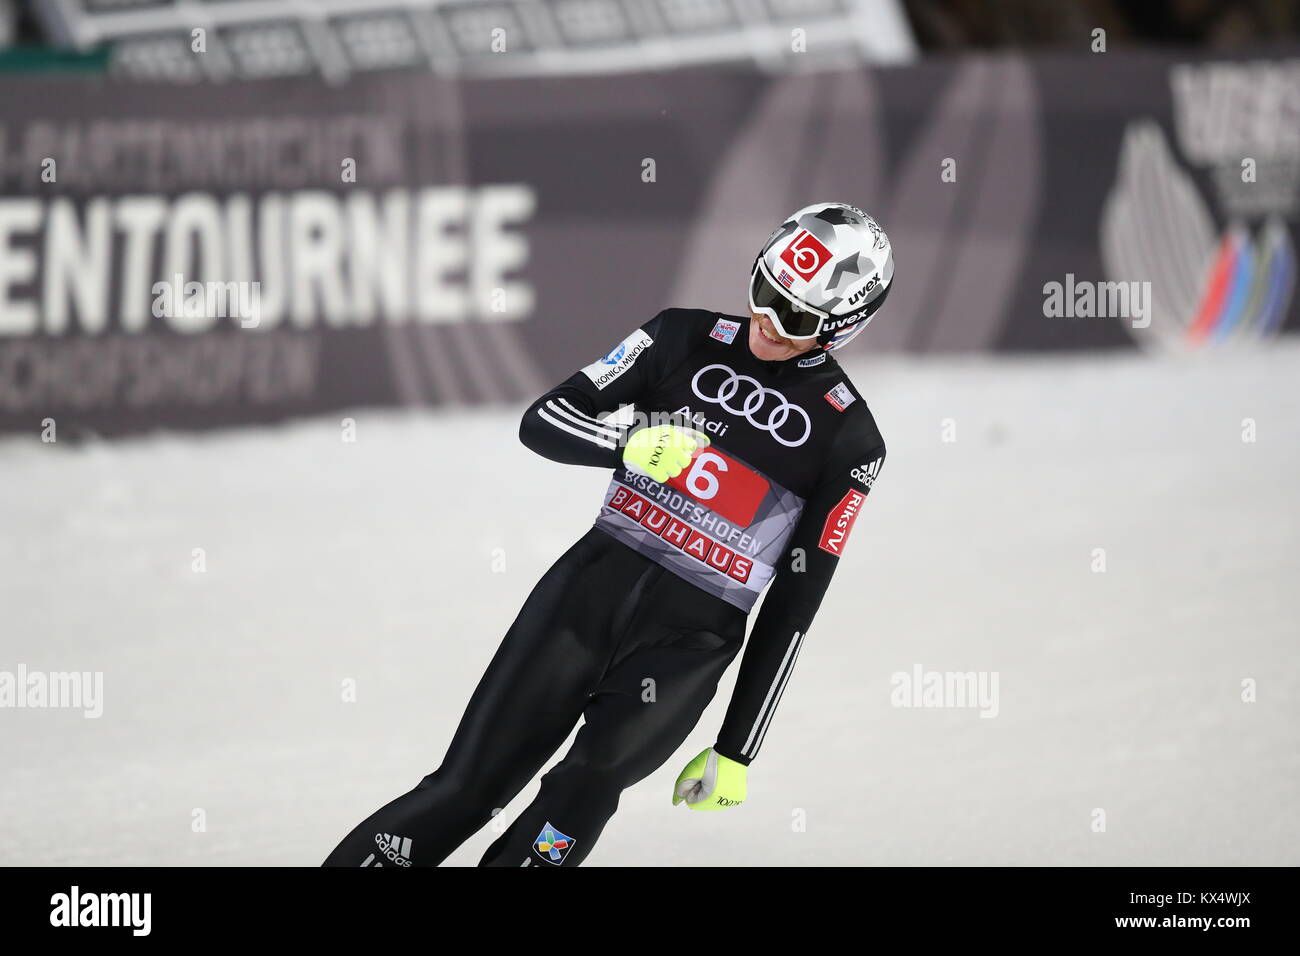 Bischofshofen, Austria. 6th Jan, 2018. Robert Johansson of Norway reacts after his jump in the second round at the 66th Four Hills Tournament in Bischofshofen, Austria, 6 January 2018. - NO WIRE SERVICE - Credit: Matthias Schrader/AP/dpa/Alamy Live News Stock Photo